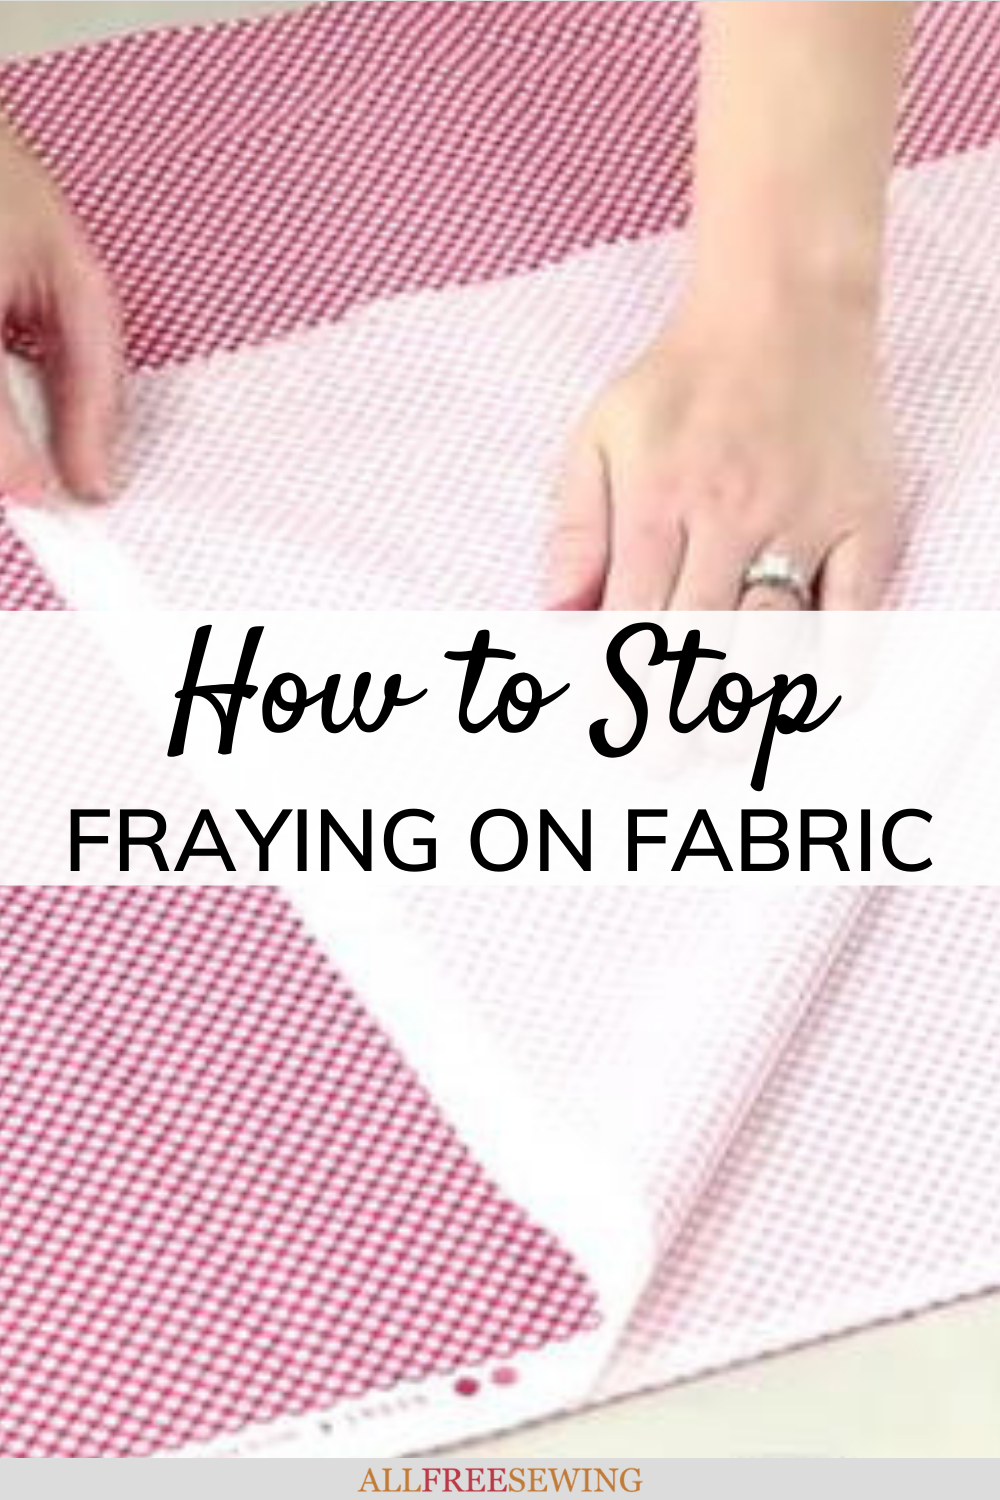 How to Sew Two Pieces of Fabric Together